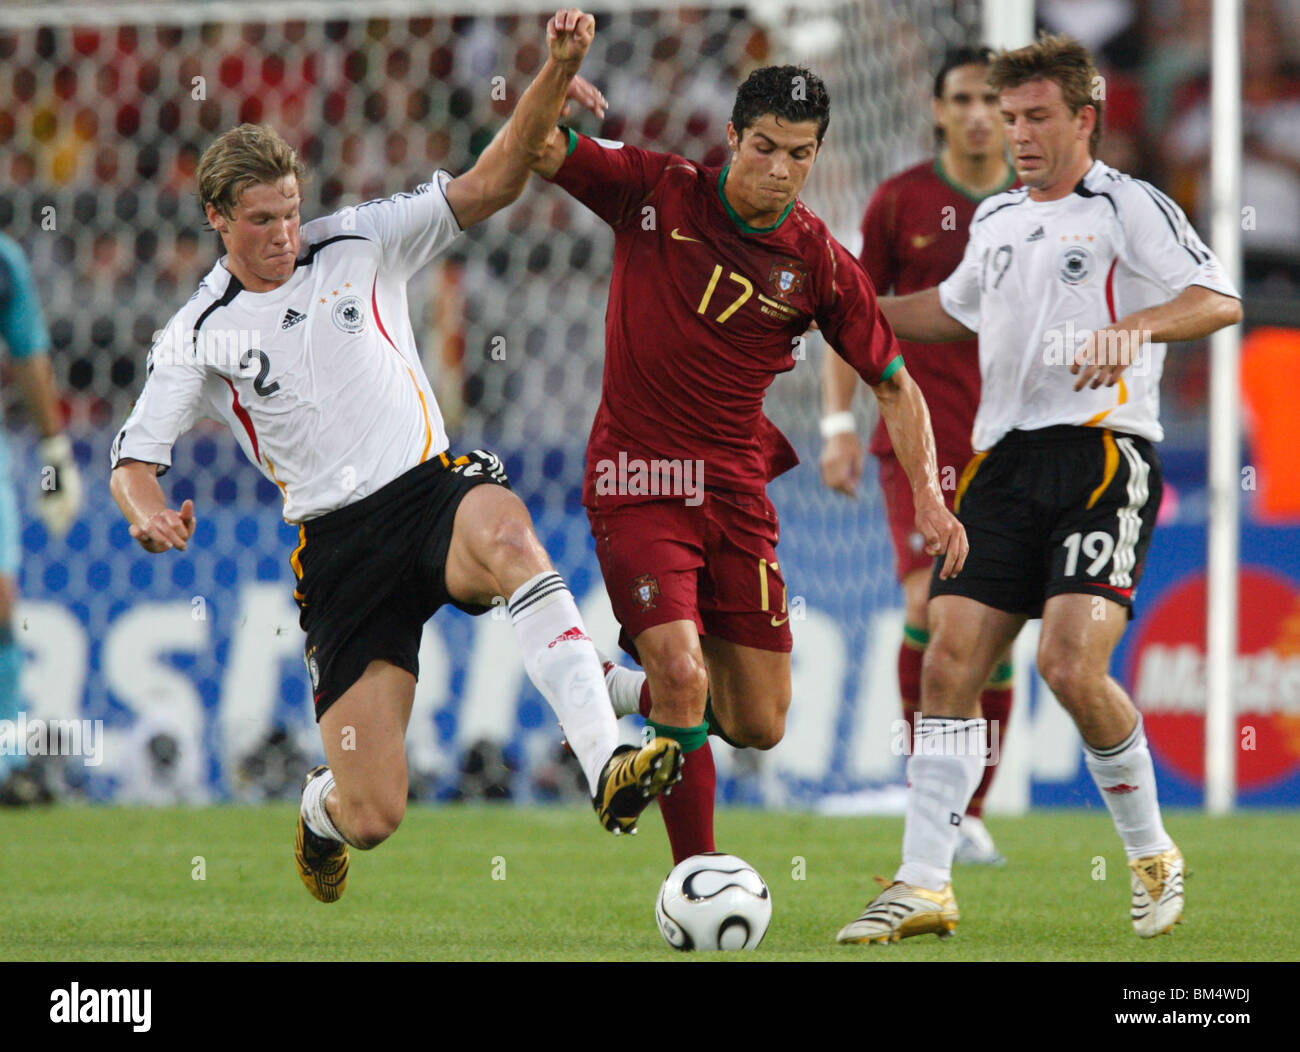 Marcell Jansen of Germany (2) defends against Cristiano Ronaldo of Portugal (17) during the 2006 World Cup third place match. Stock Photo